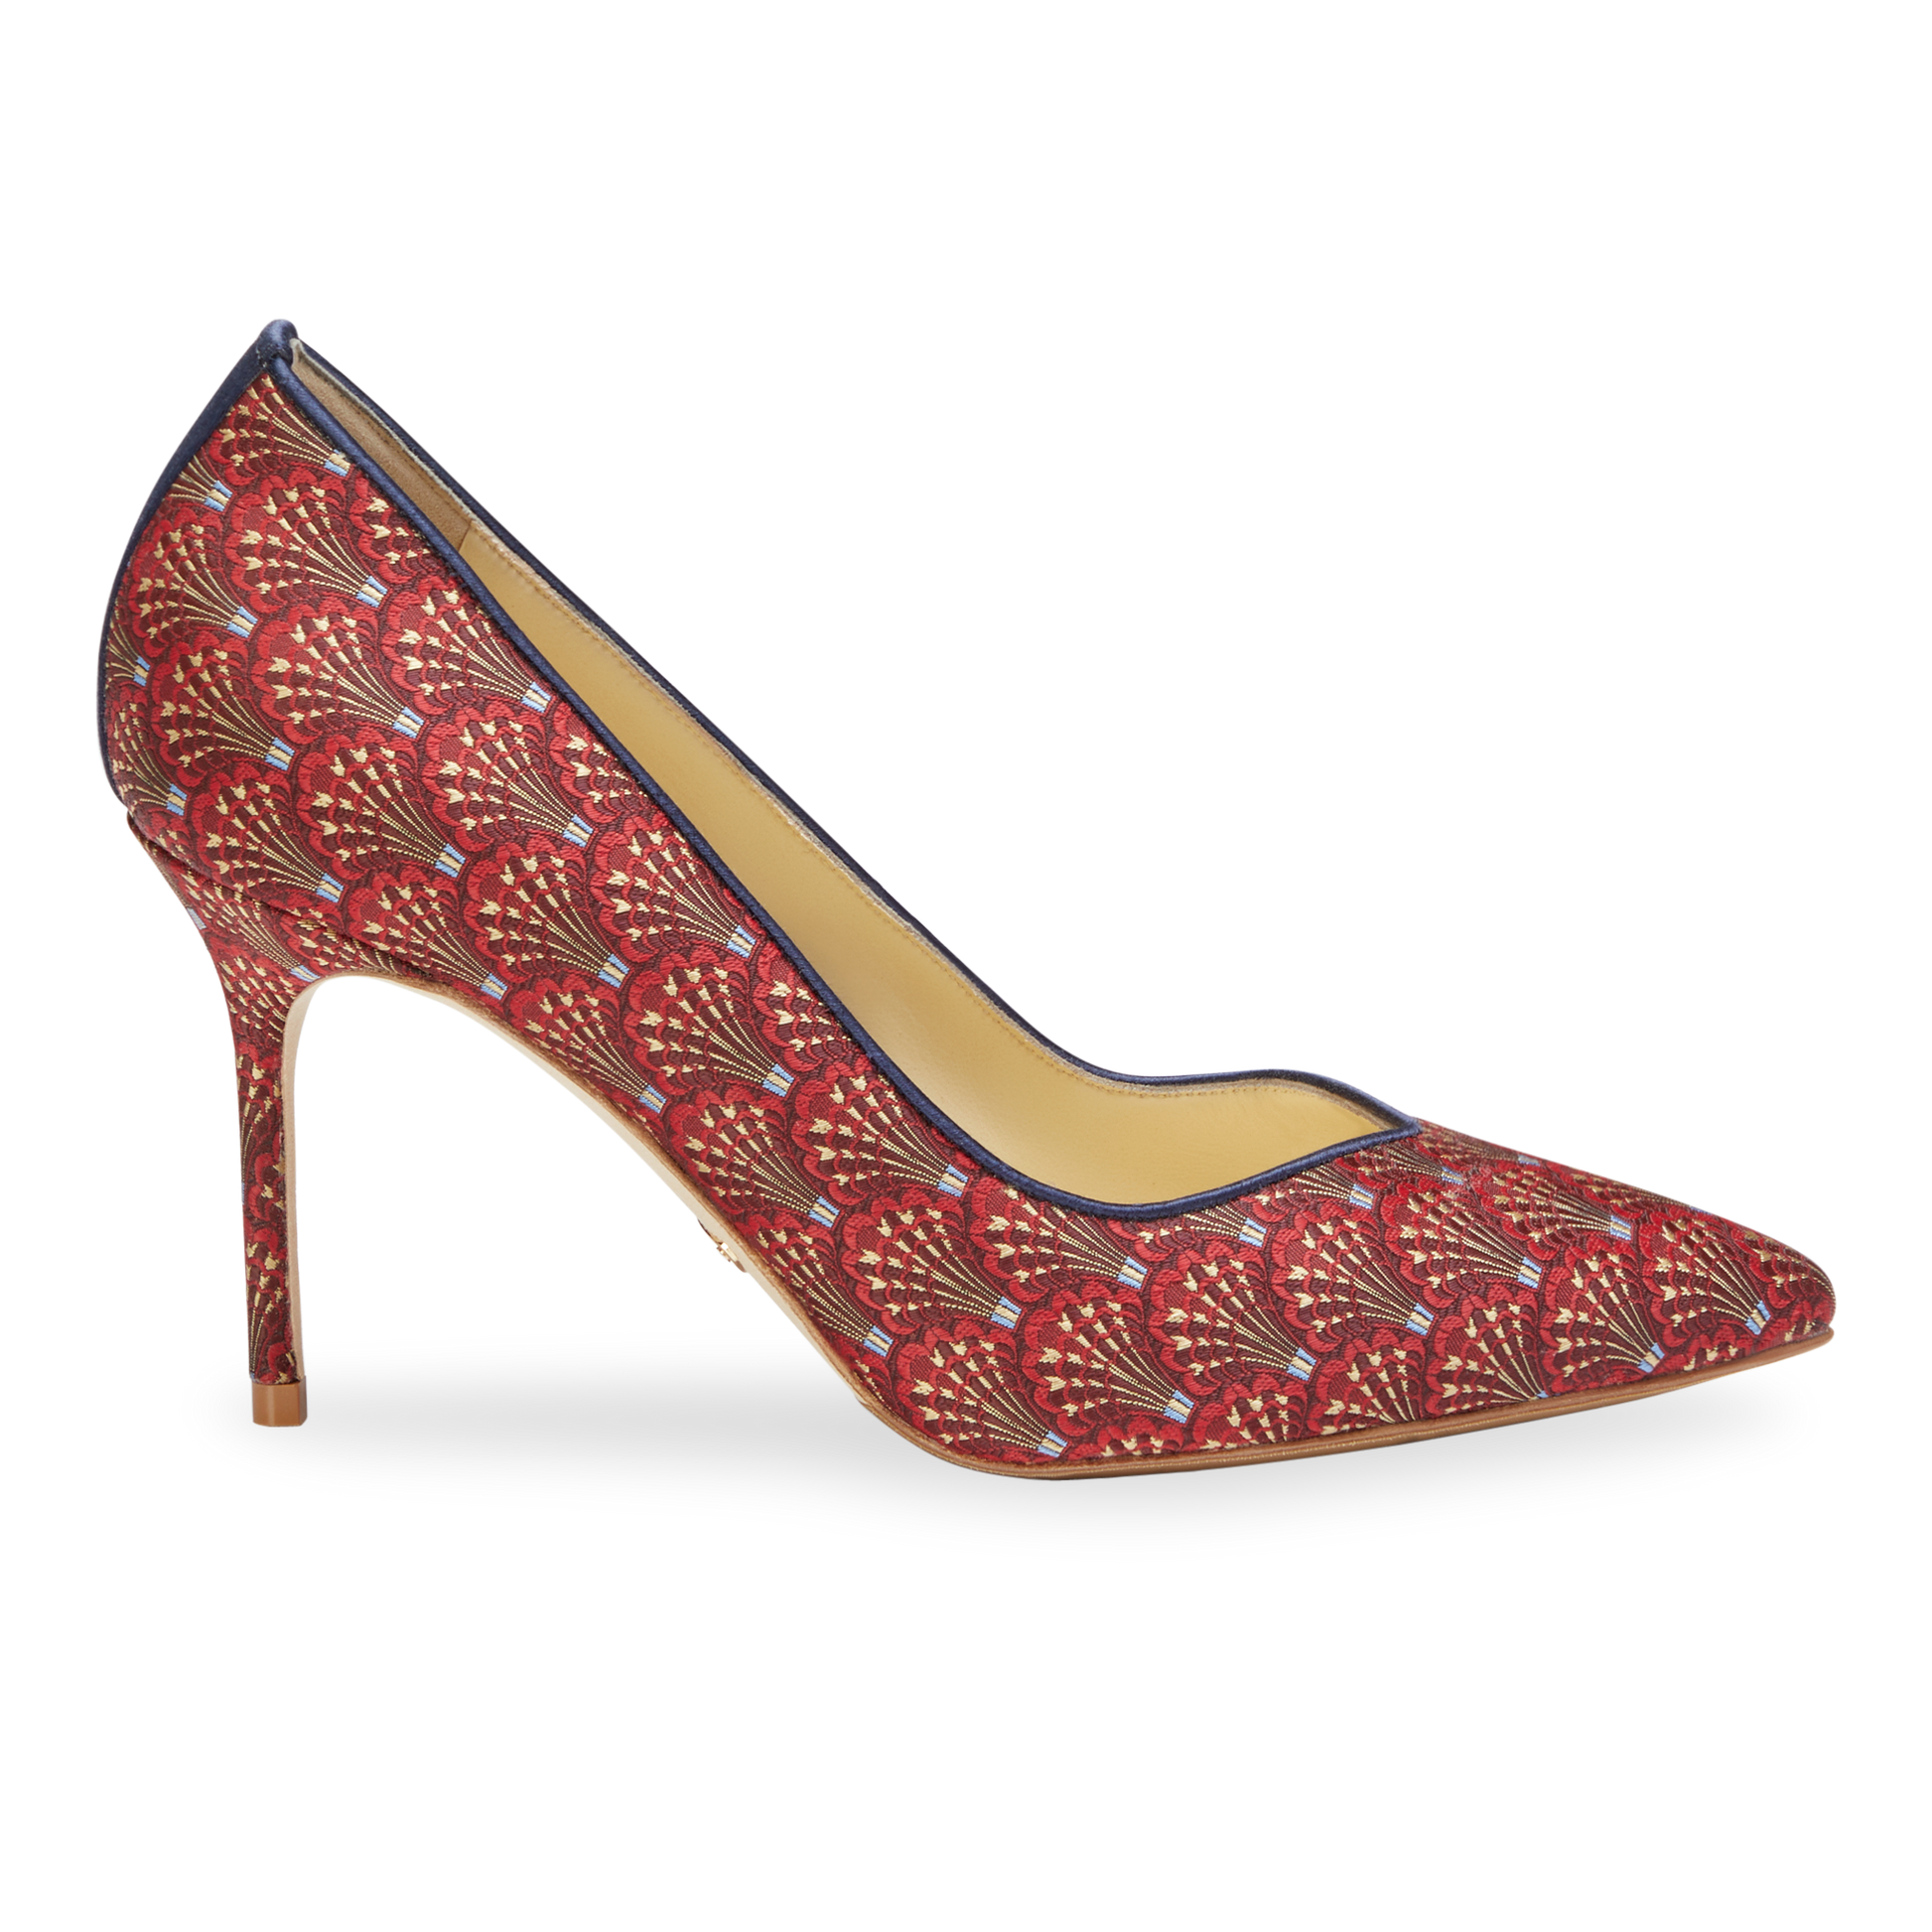 Perfect Pump 85 in Red Vienna Jacquard